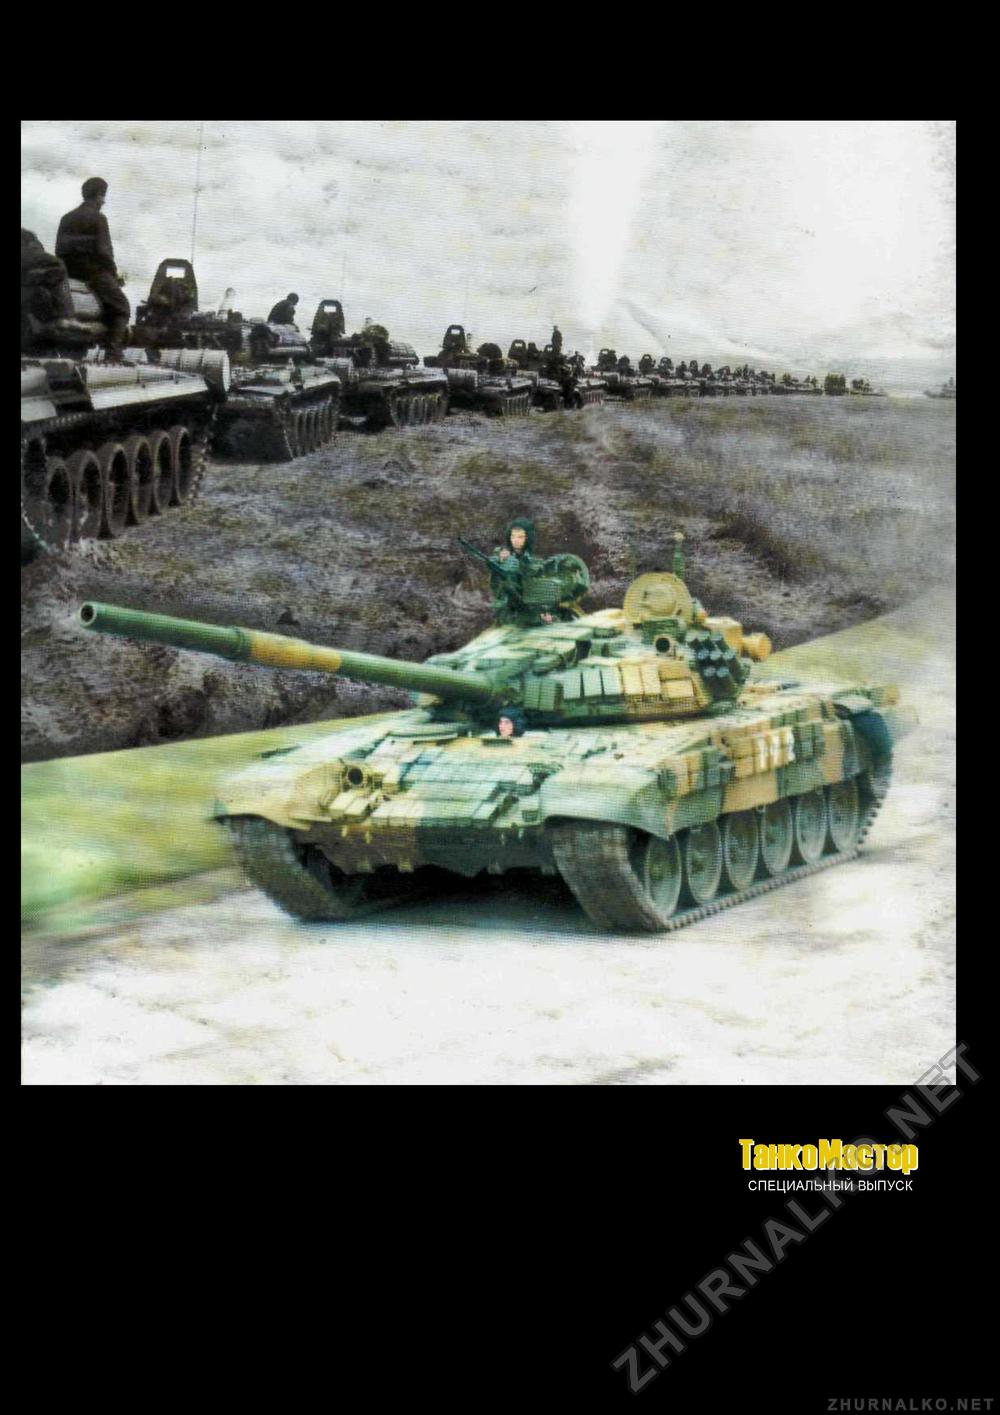  Special -  T-72,  68